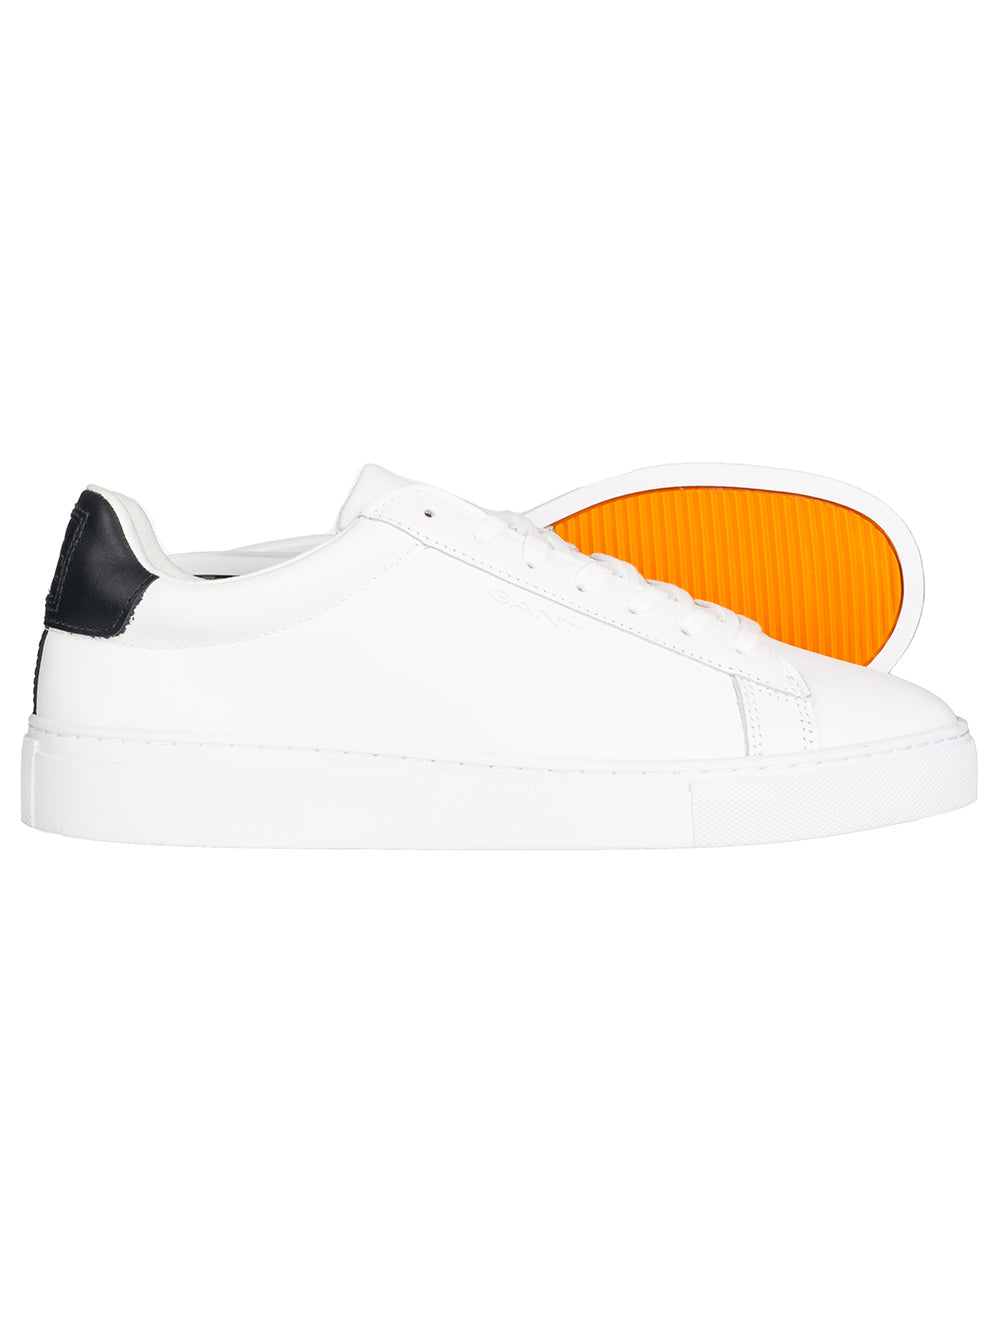 McJulien Leather Sneakers White